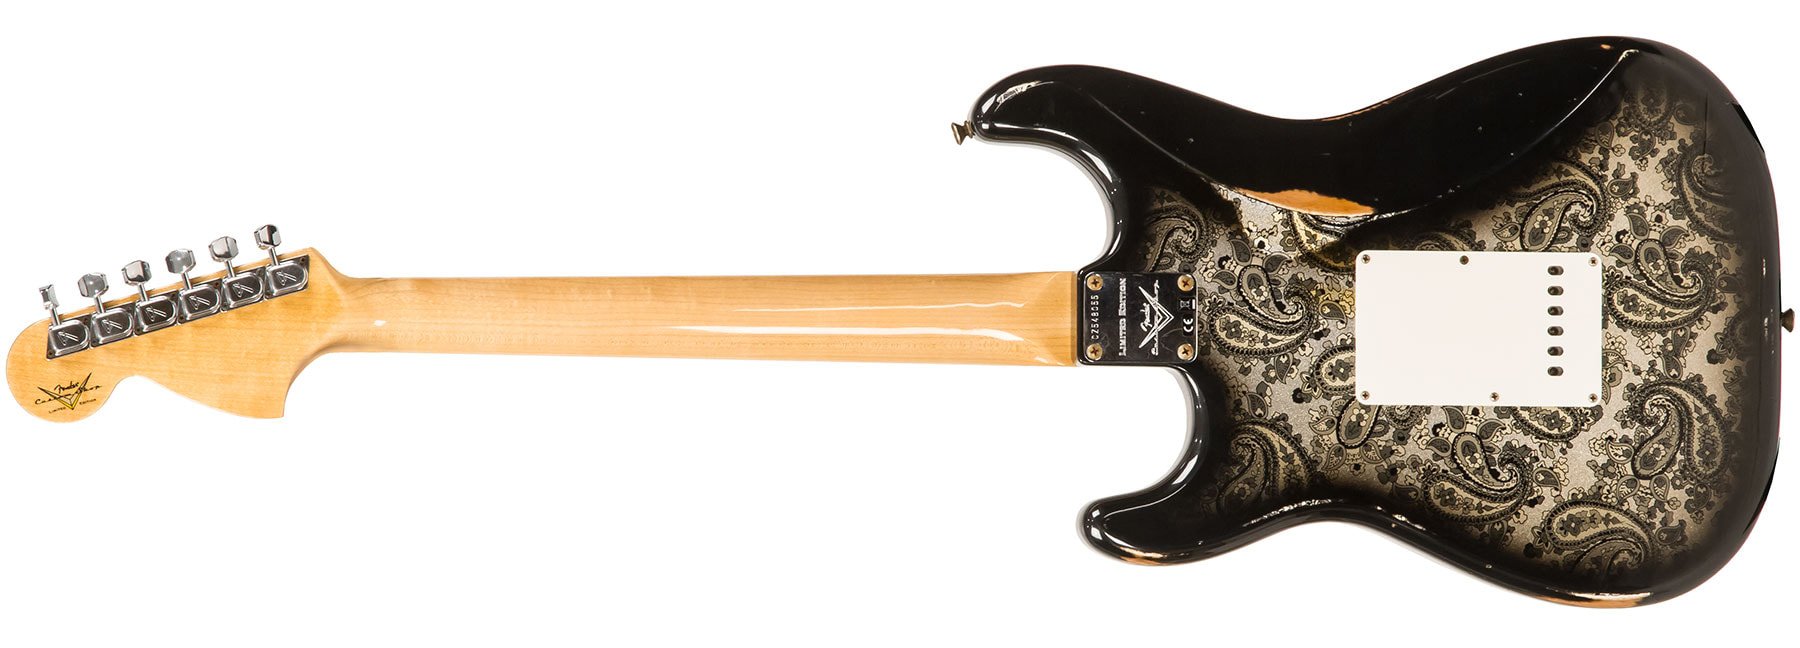 Limited '69 Black Paisley Stratocaster Relic back